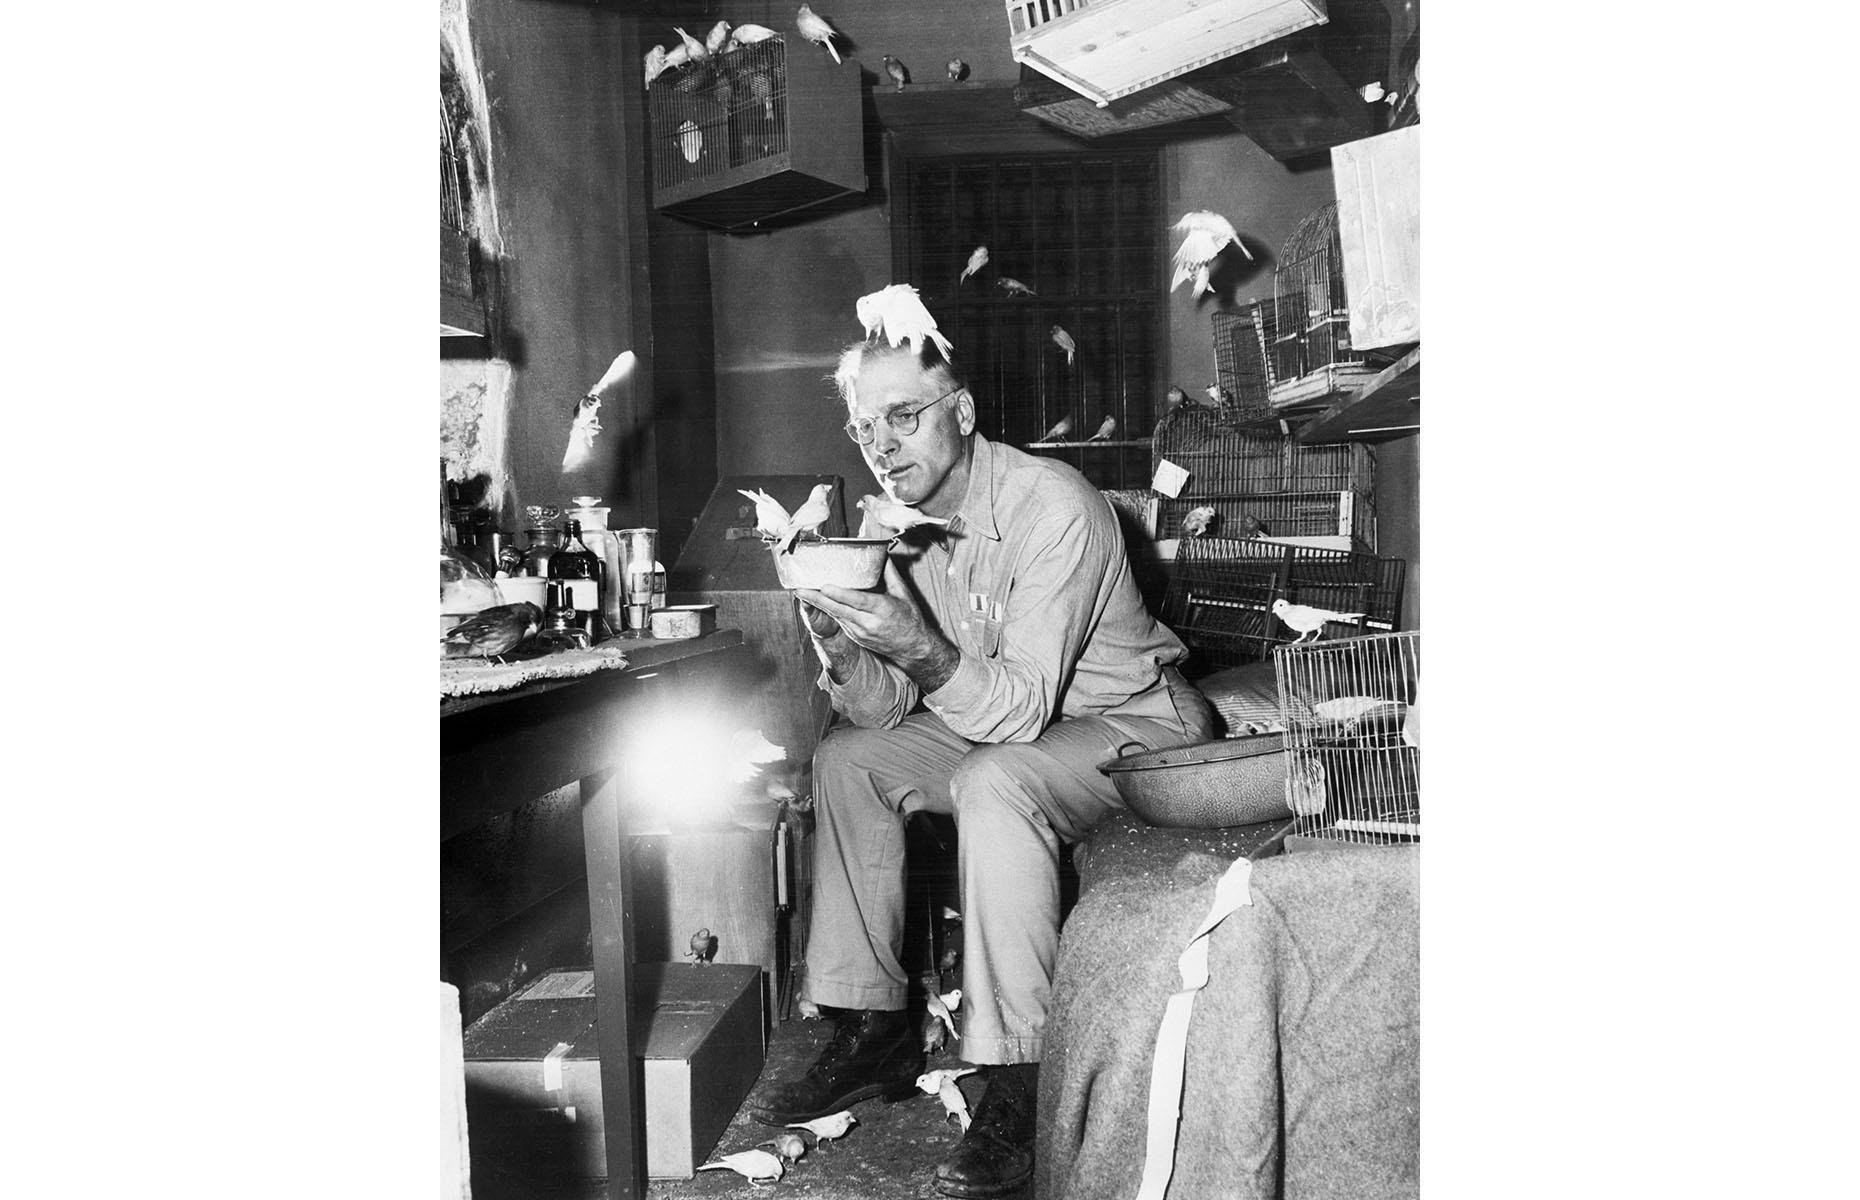 <p>Stroud used his years at Leavenworth to become a self-taught and apparently excellent ornithologist, keeping, breeding and studying birds and writing two books about canaries and their diseases. But when he came to Alcatraz in 1942 he had to leave all his birds and equipment behind. In this photograph, he's being portrayed by actor Burt Lancaster in the 1962 film <em>The Birdman of Alcatraz </em>– although some of Stroud's fellow inmates took issue with the film's grandfatherly portrayal. He eventually died in 1963.</p>